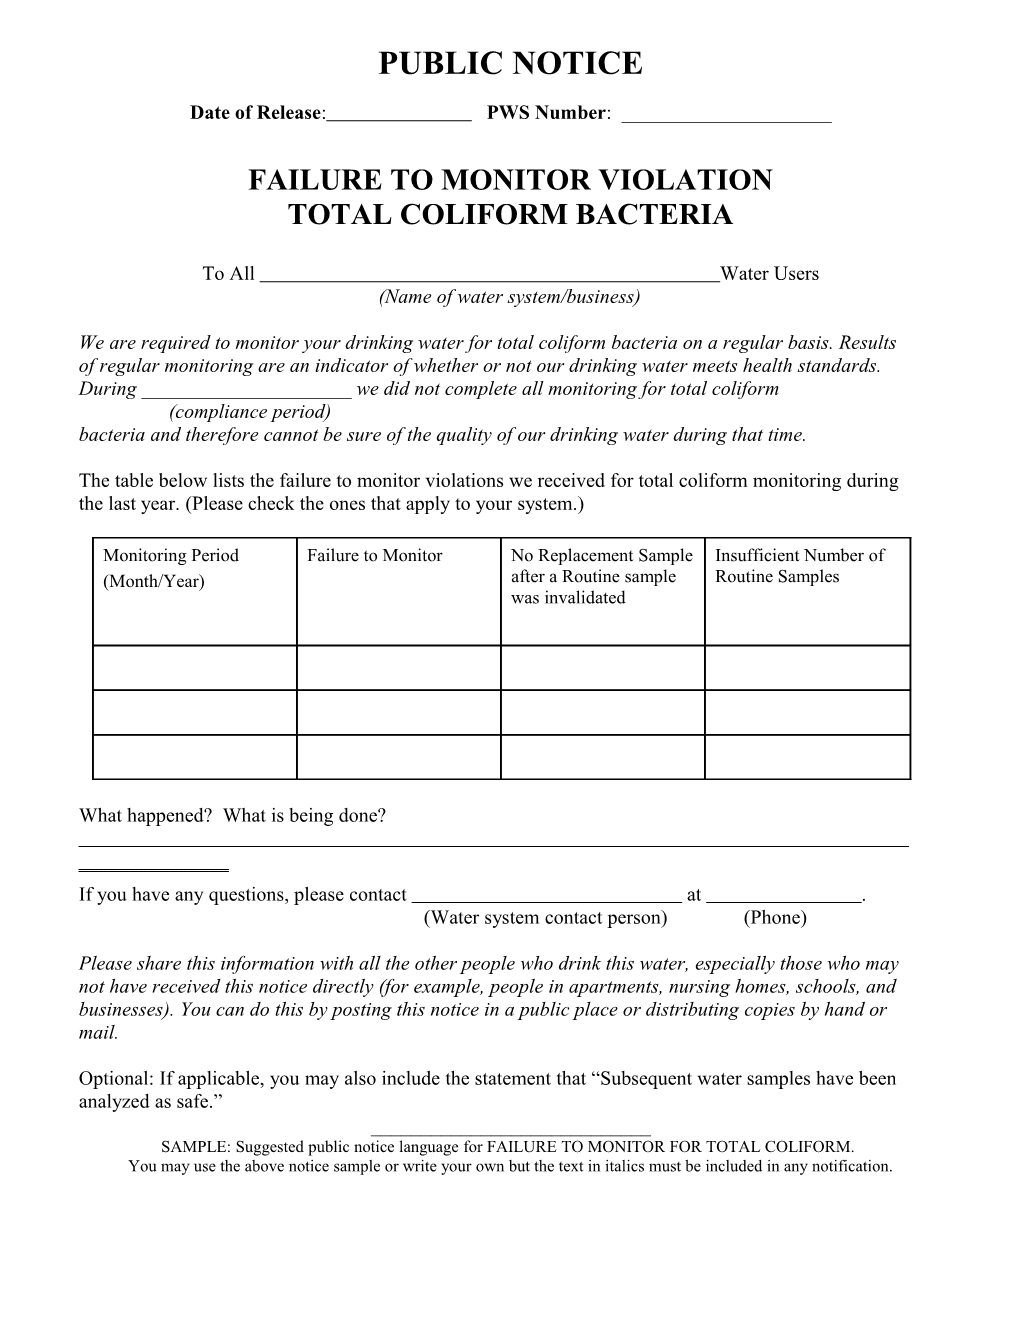 Public Notification - Total Coliform Rule - Failure to Monitor Template